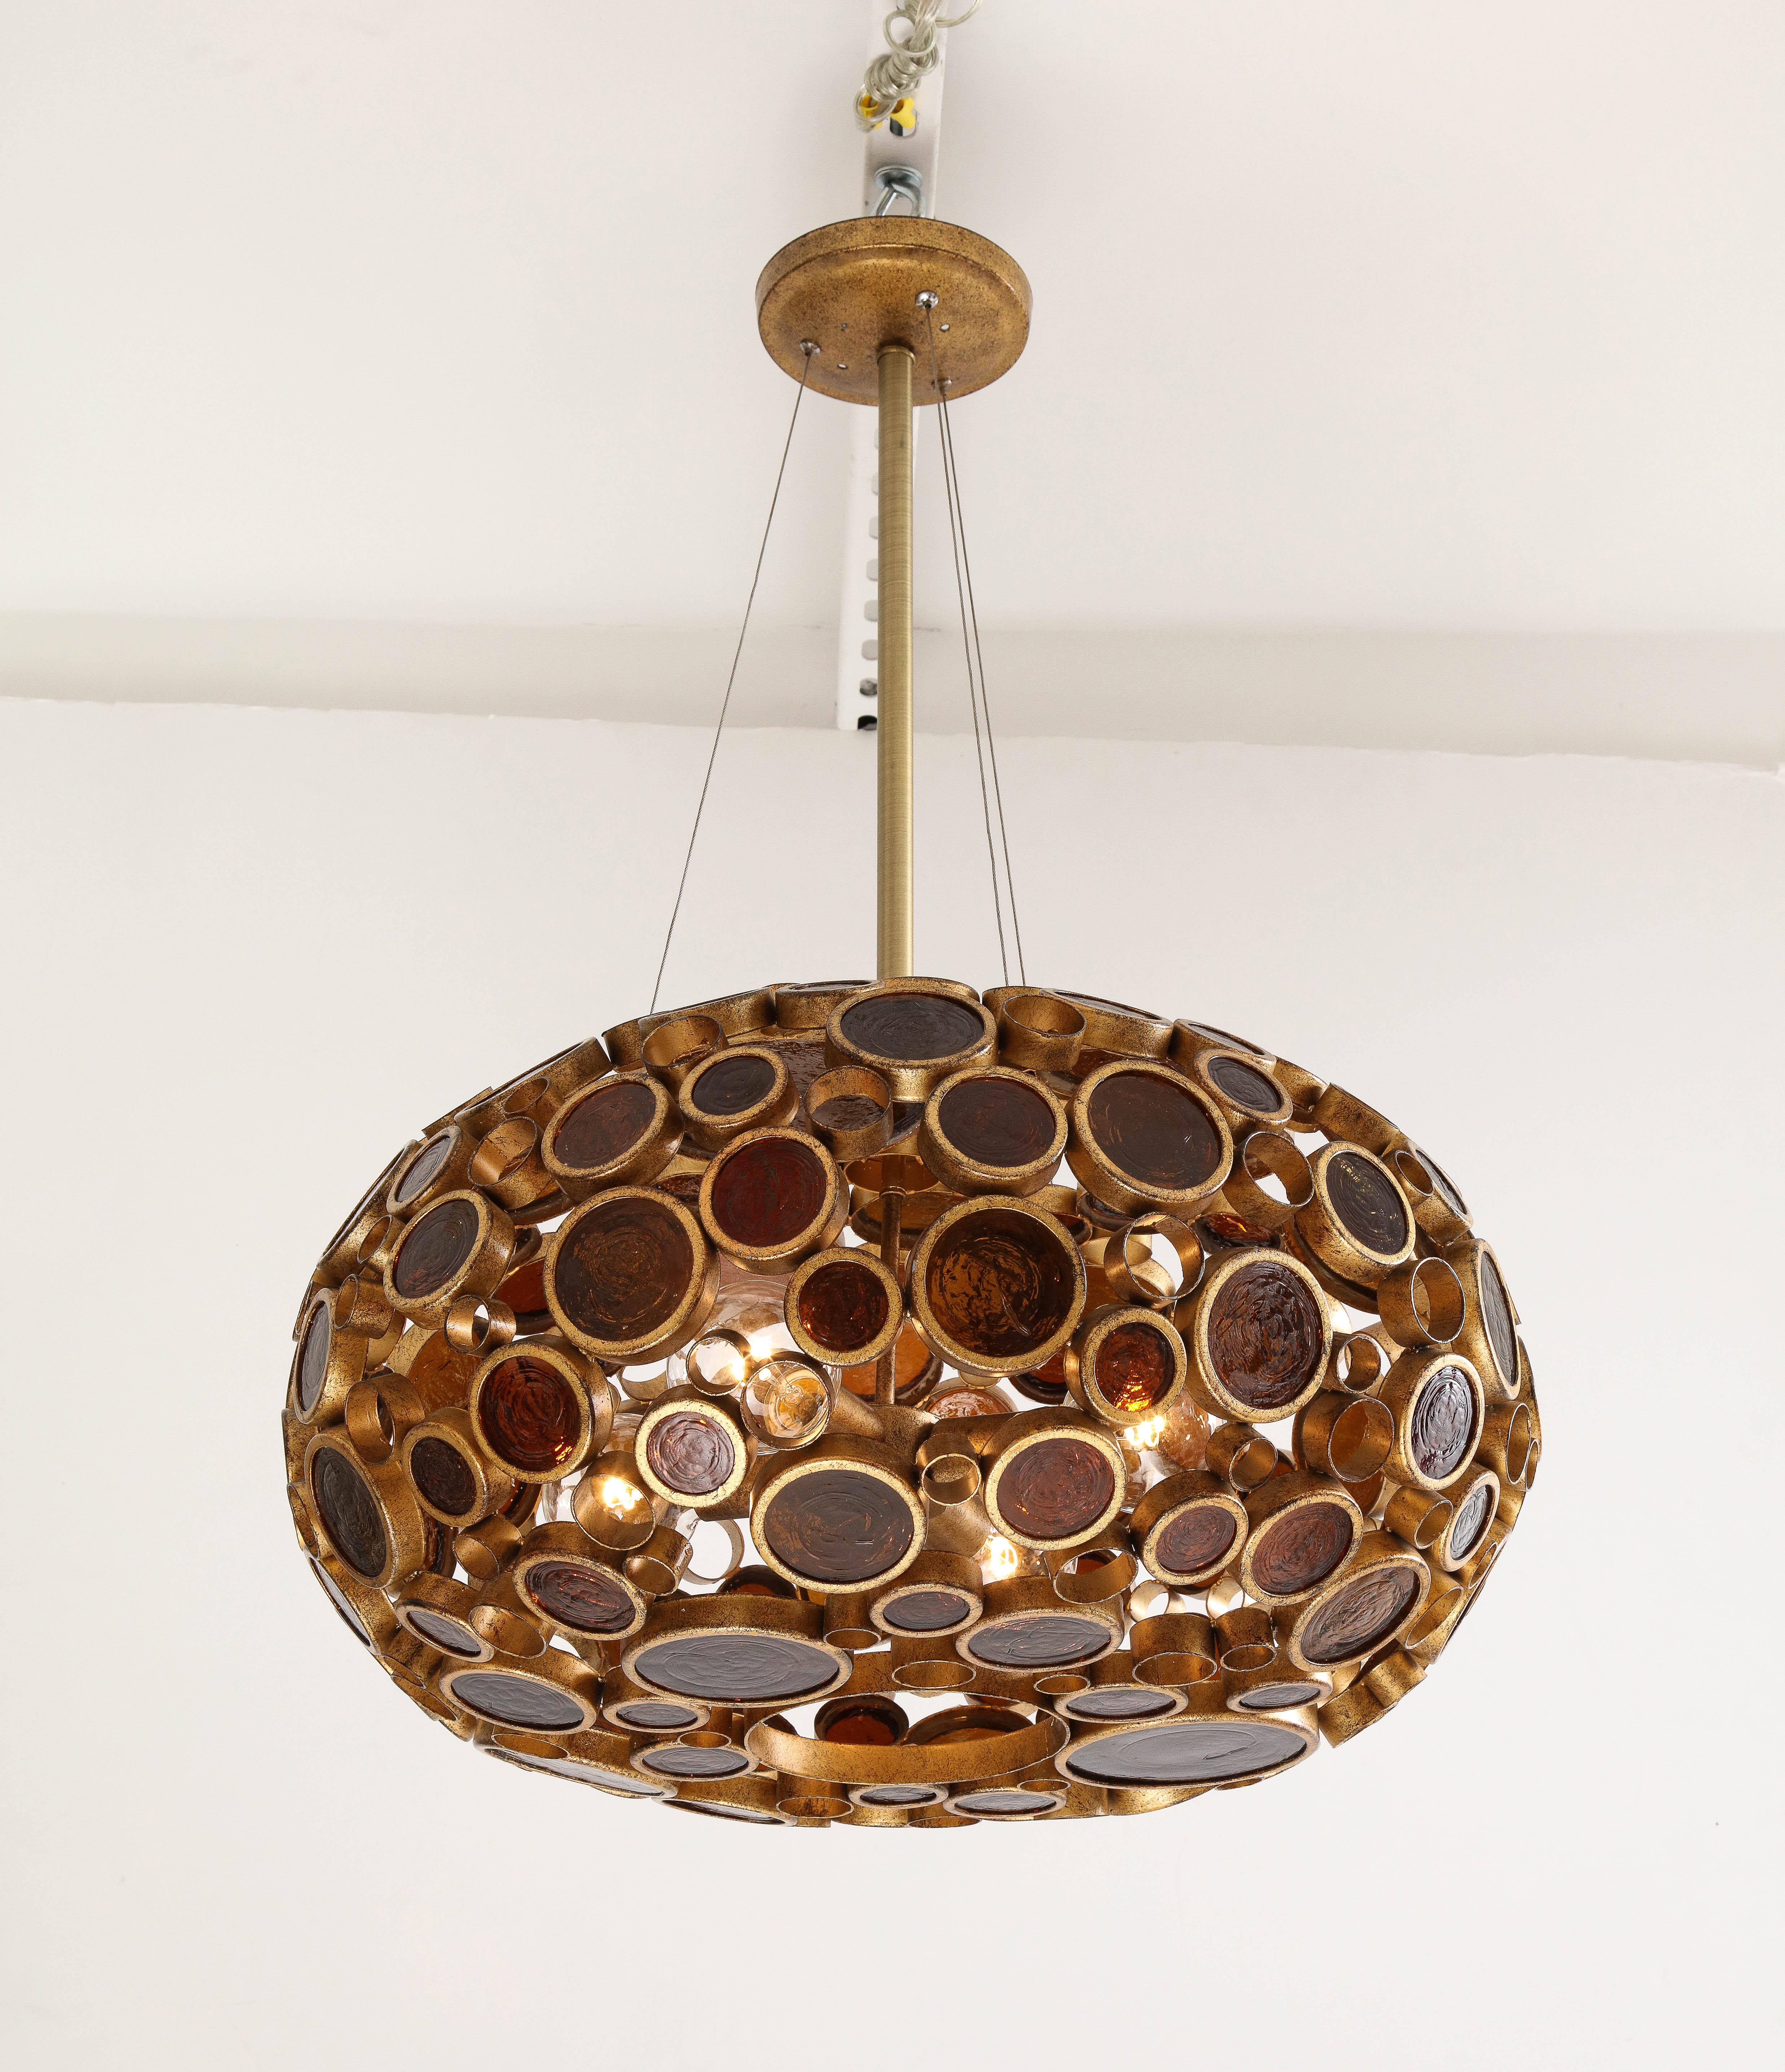 1970s midcentury OP Art glass chandelier.
The Brass fixture has various sized Amber colored glass Rondelays which are illuminated
by four standard light sources.